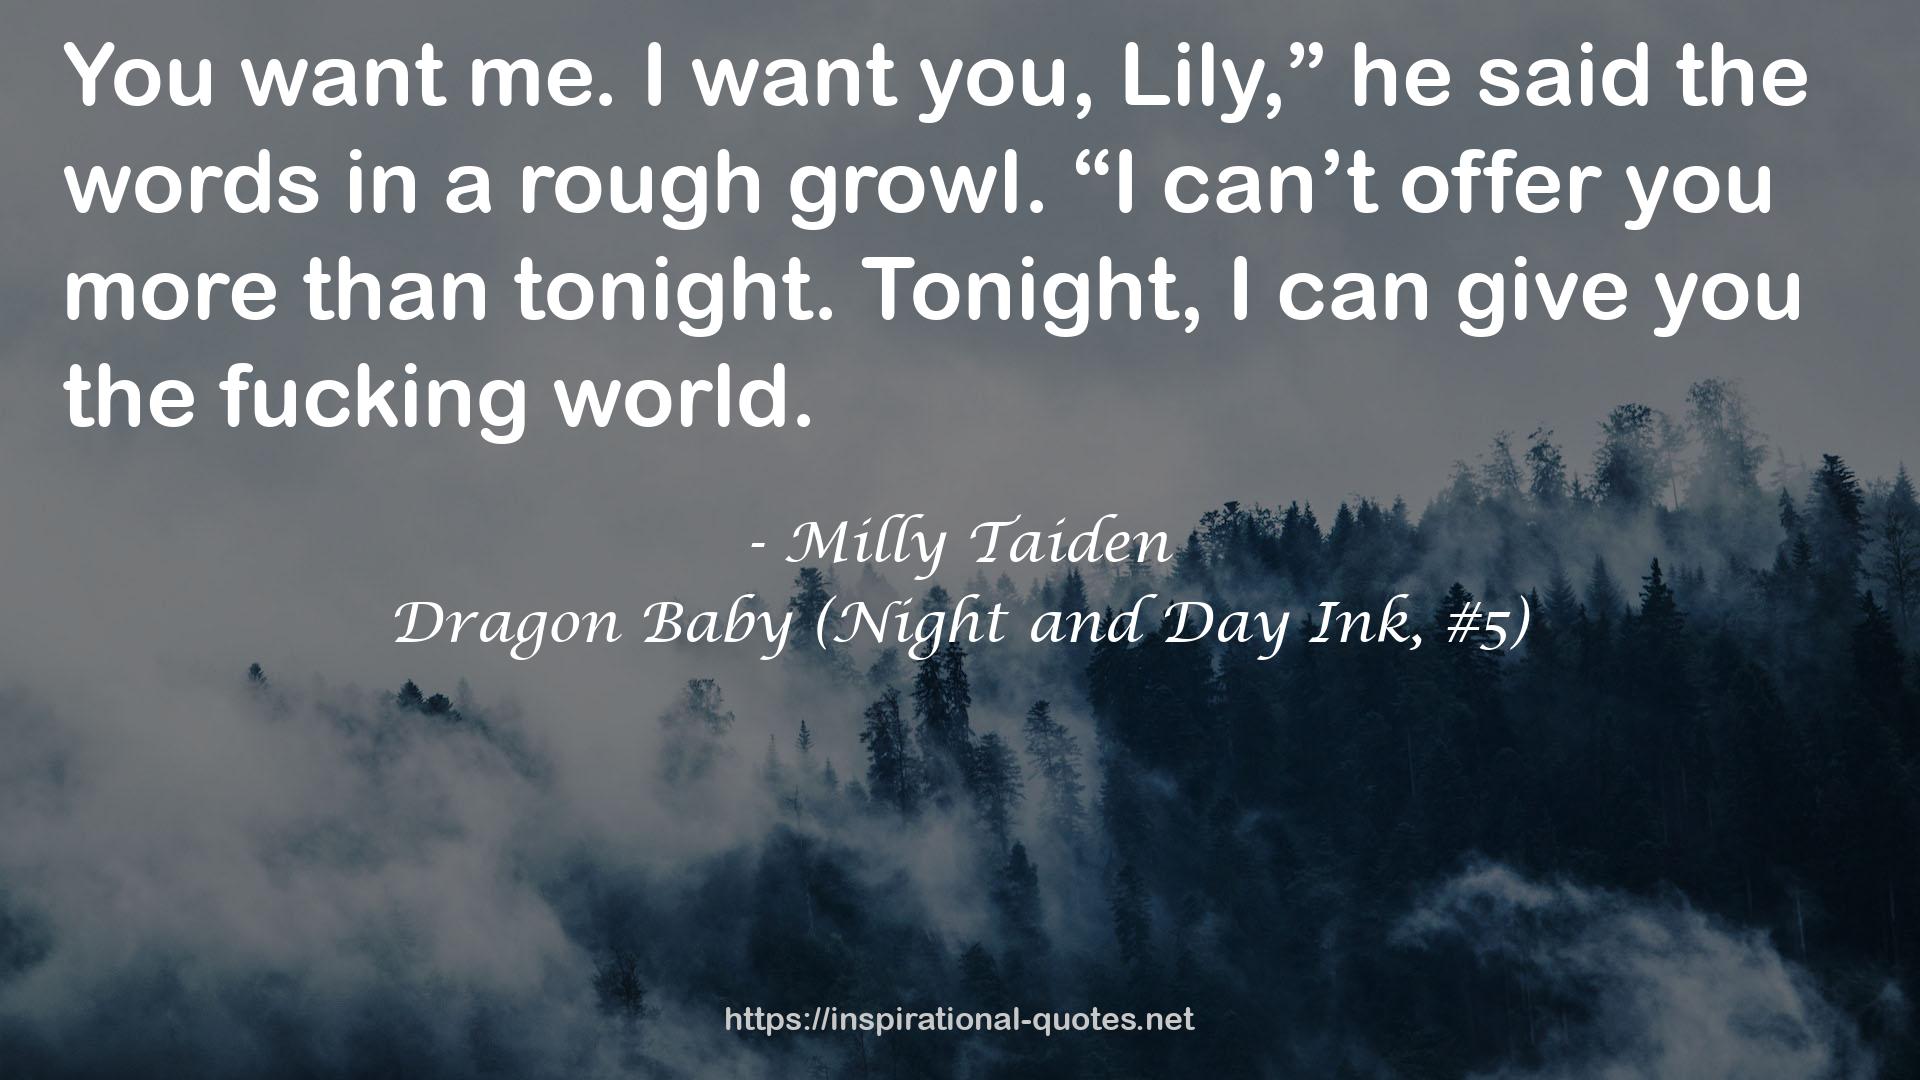 Dragon Baby (Night and Day Ink, #5) QUOTES